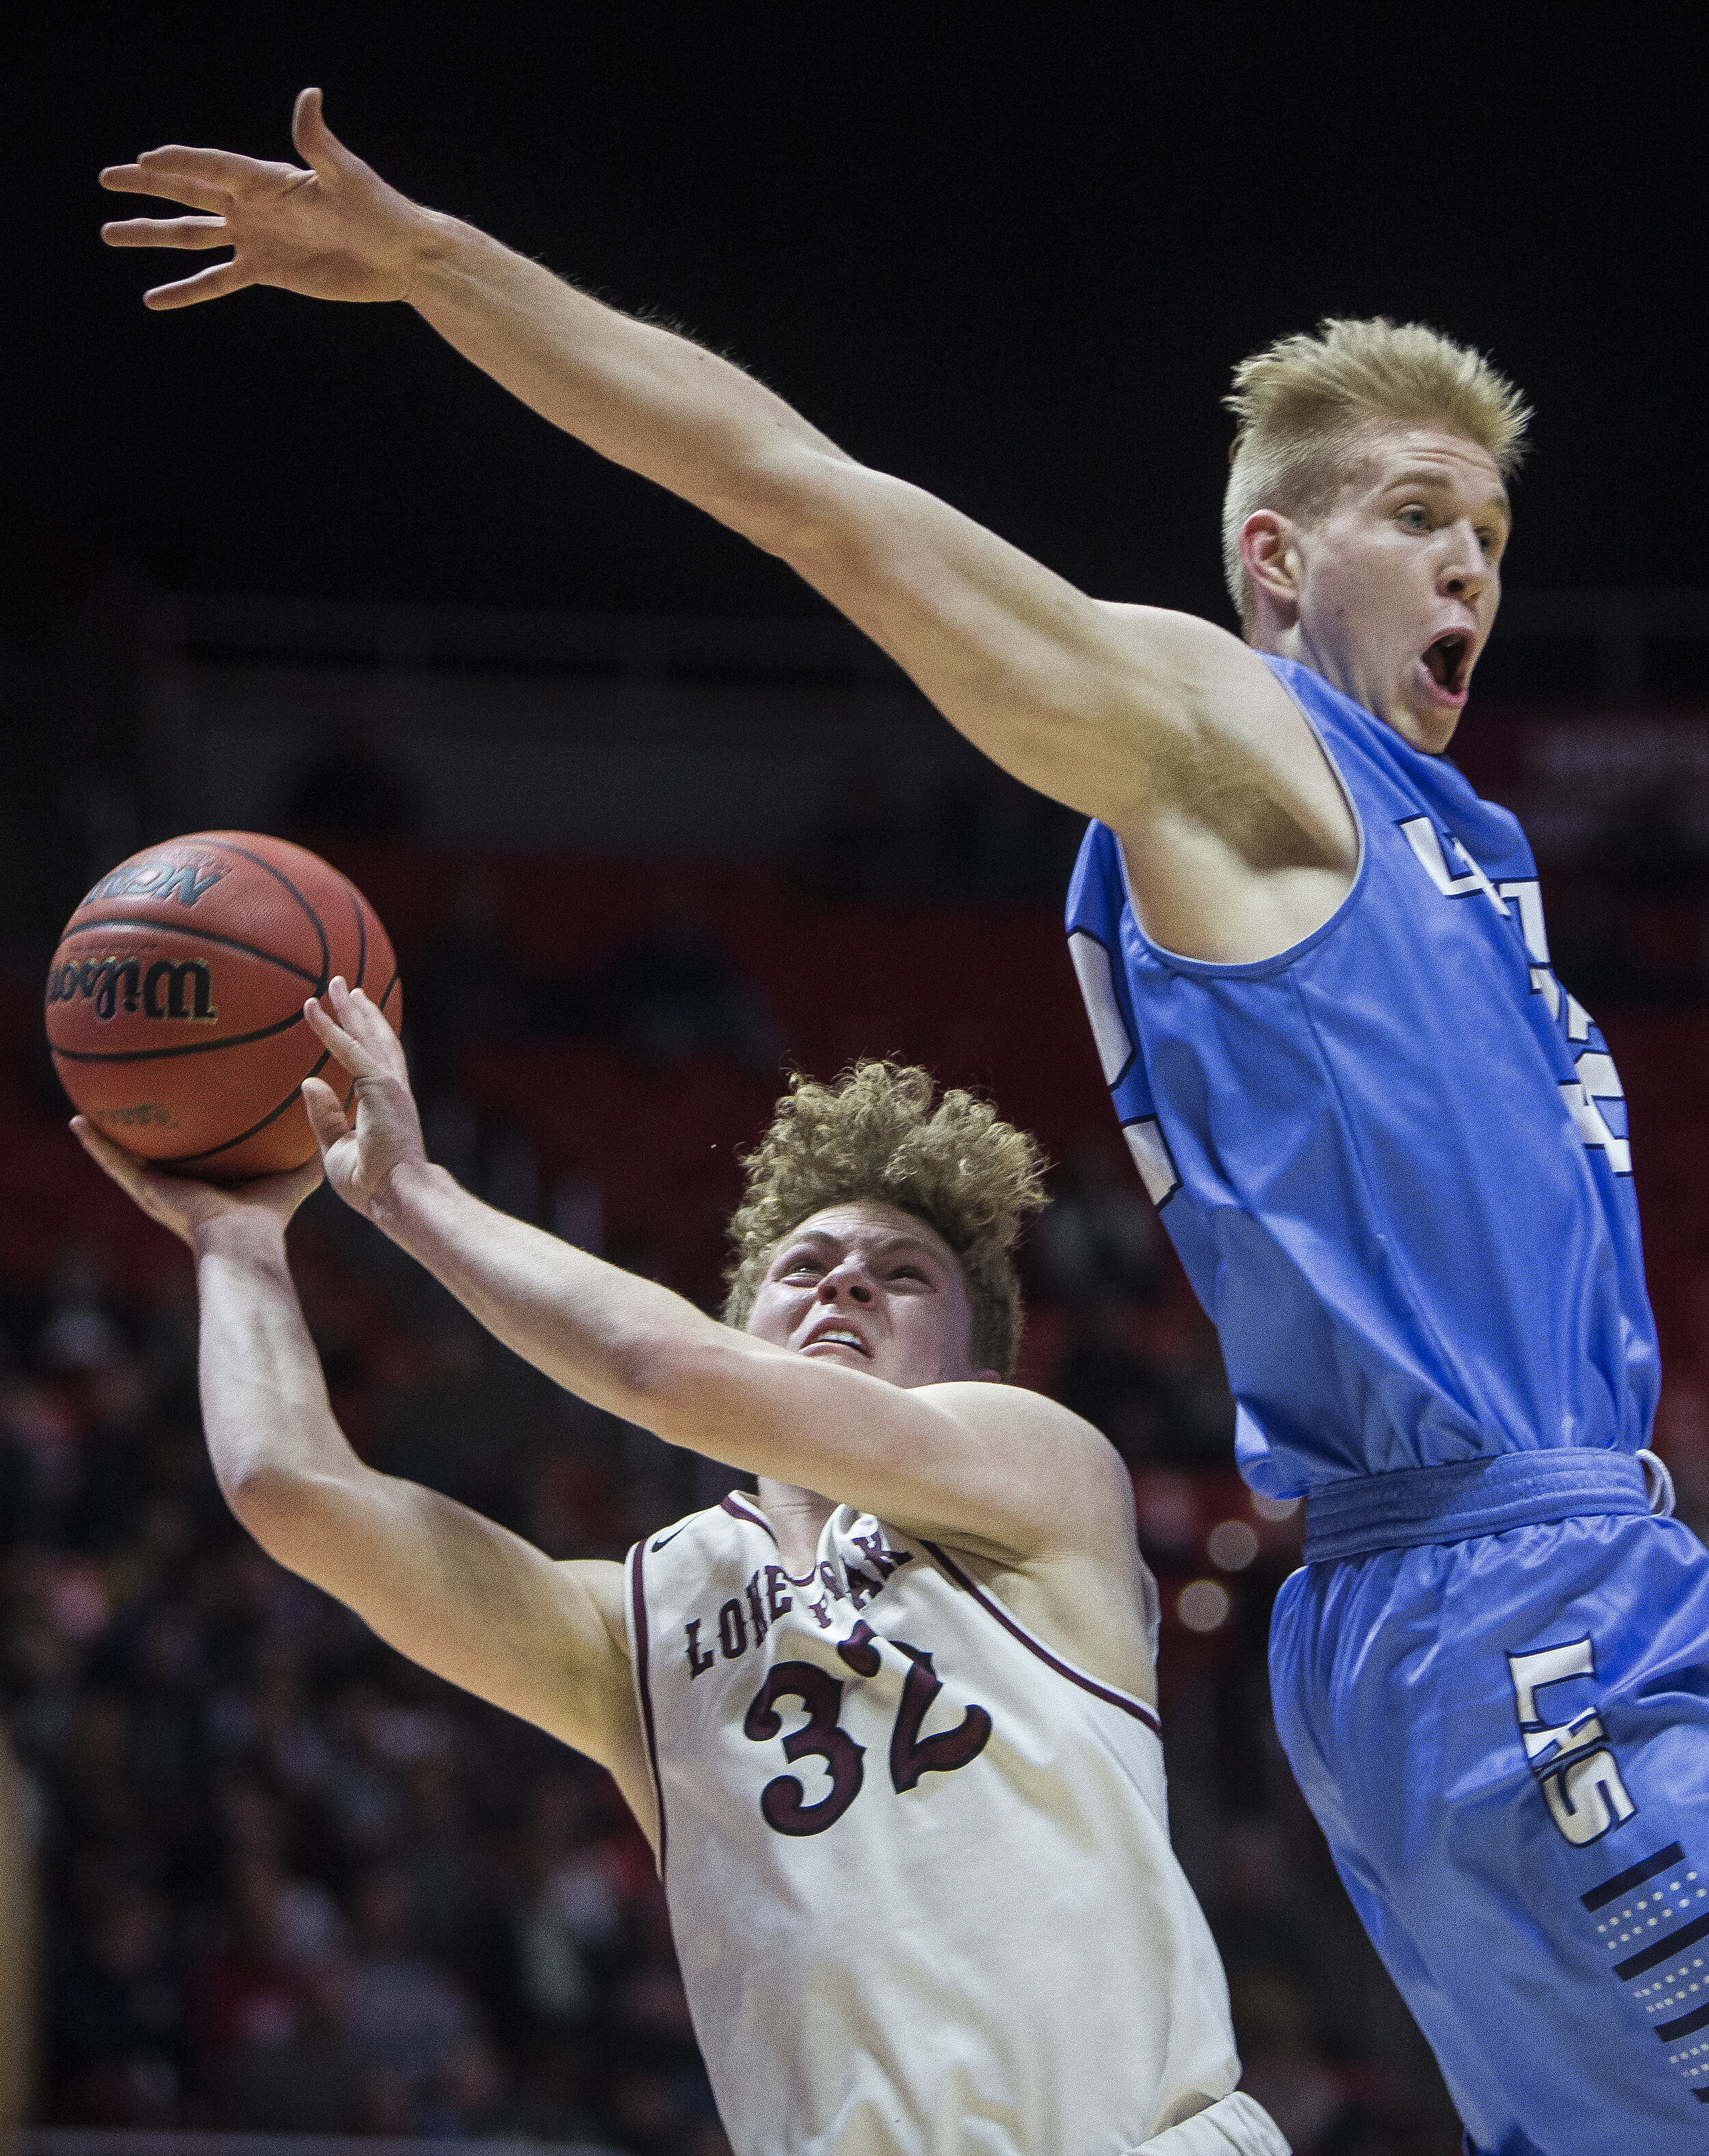  Lone Peak's Taylor Madson puts up a shot while guarded by Layton's Skyler Turner during the Lone Peak Knights' and Layton Lancers' matchup in the Class 6A state semifinals at the Jon M. Huntsman Center on March 2 in Salt Lake City.  